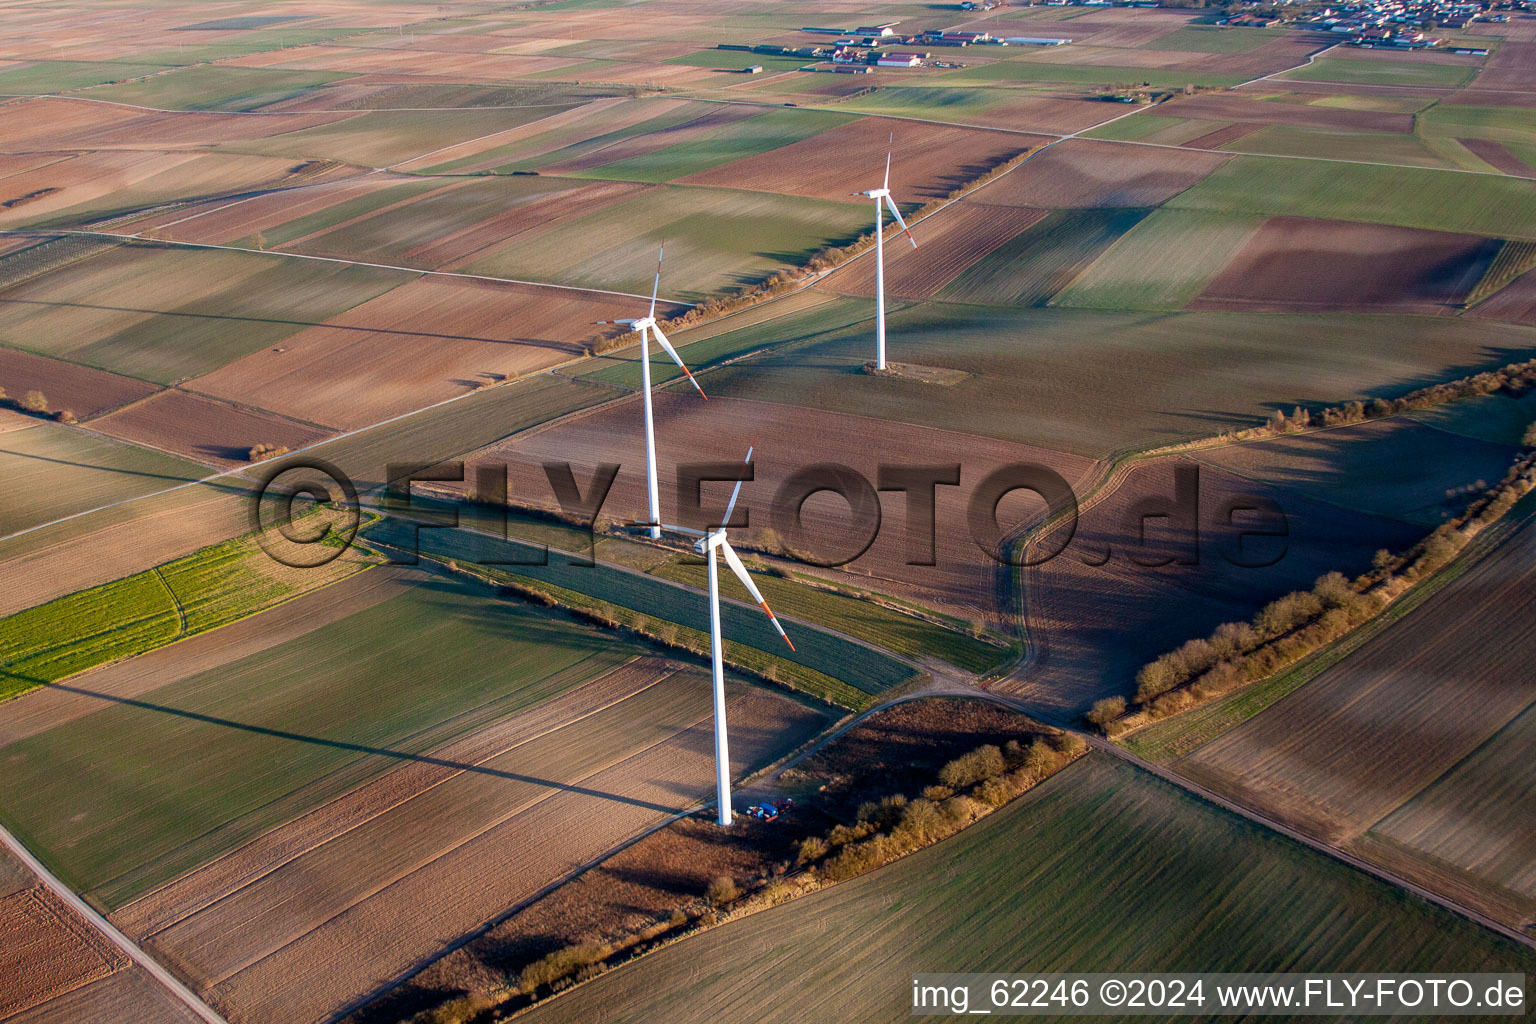 Wind turbines in Offenbach an der Queich in the state Rhineland-Palatinate, Germany